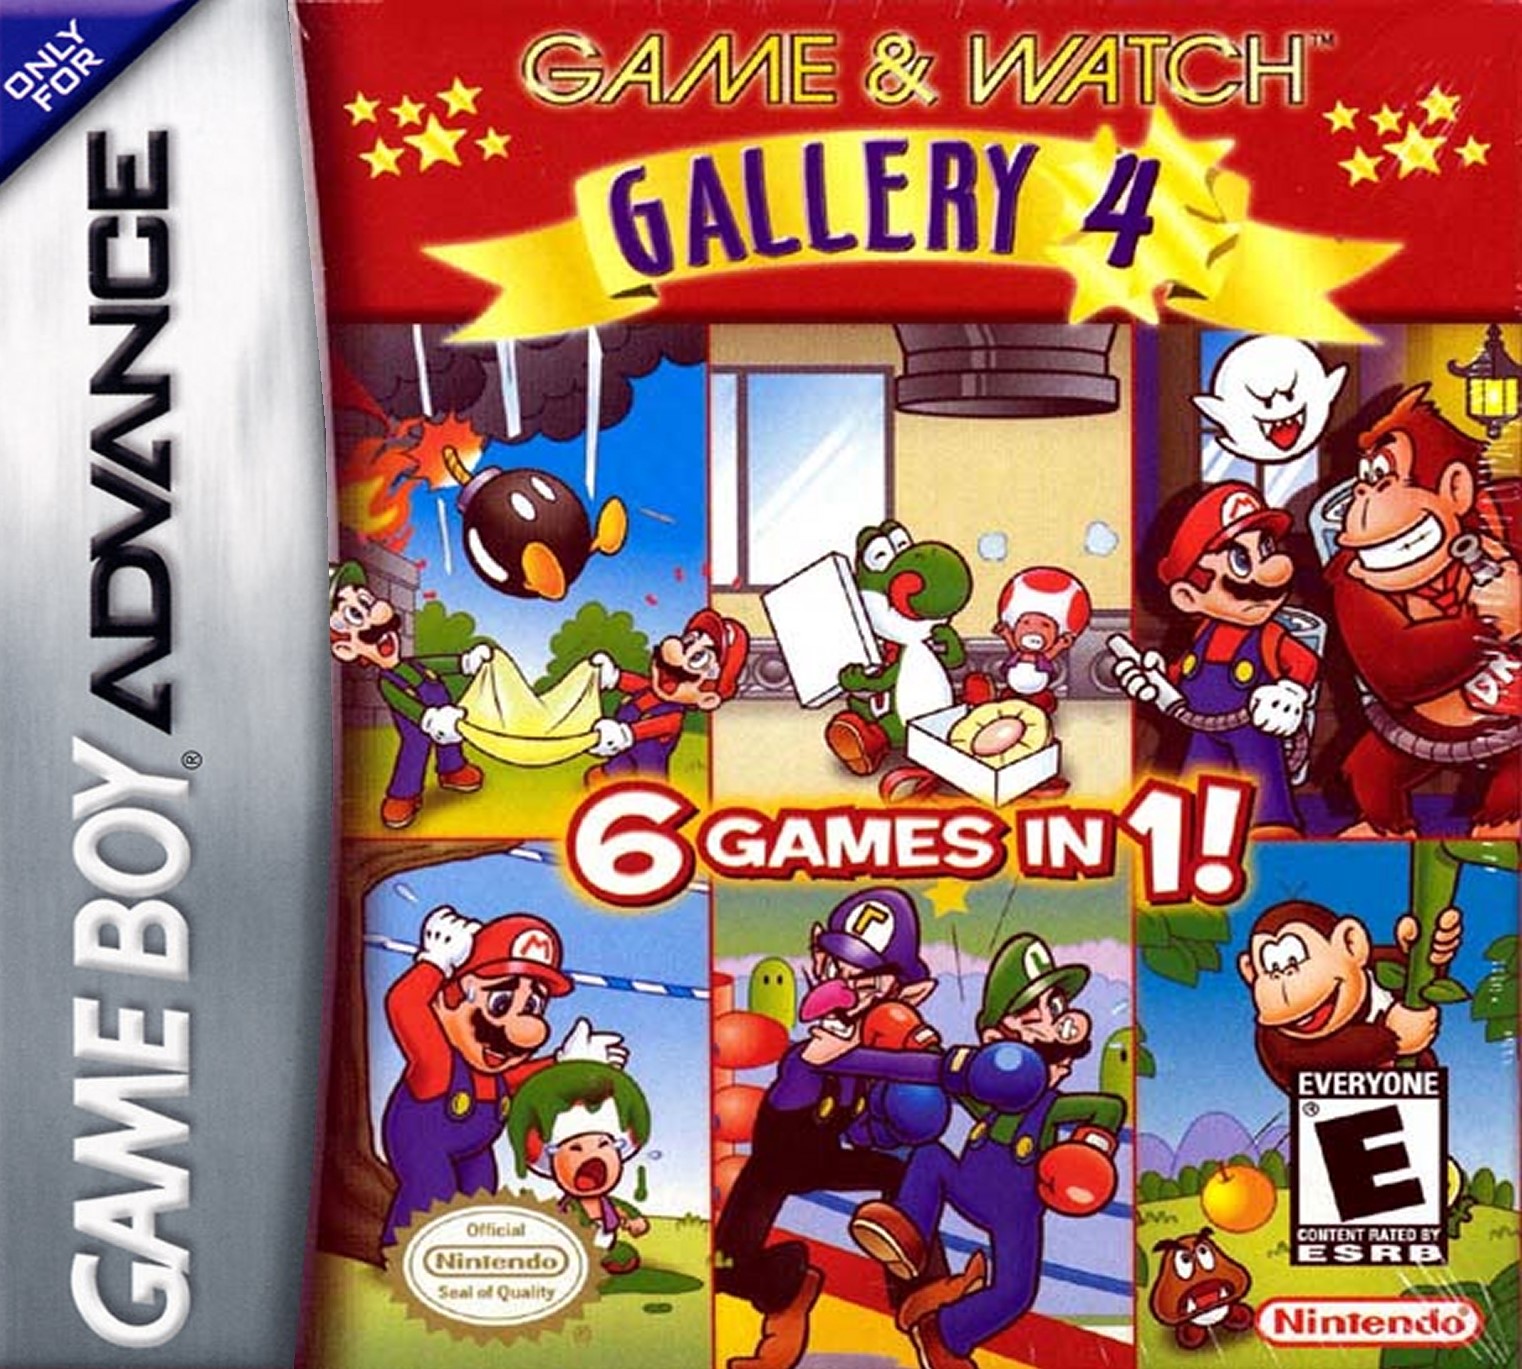 'Game and Watch Gallery 4'